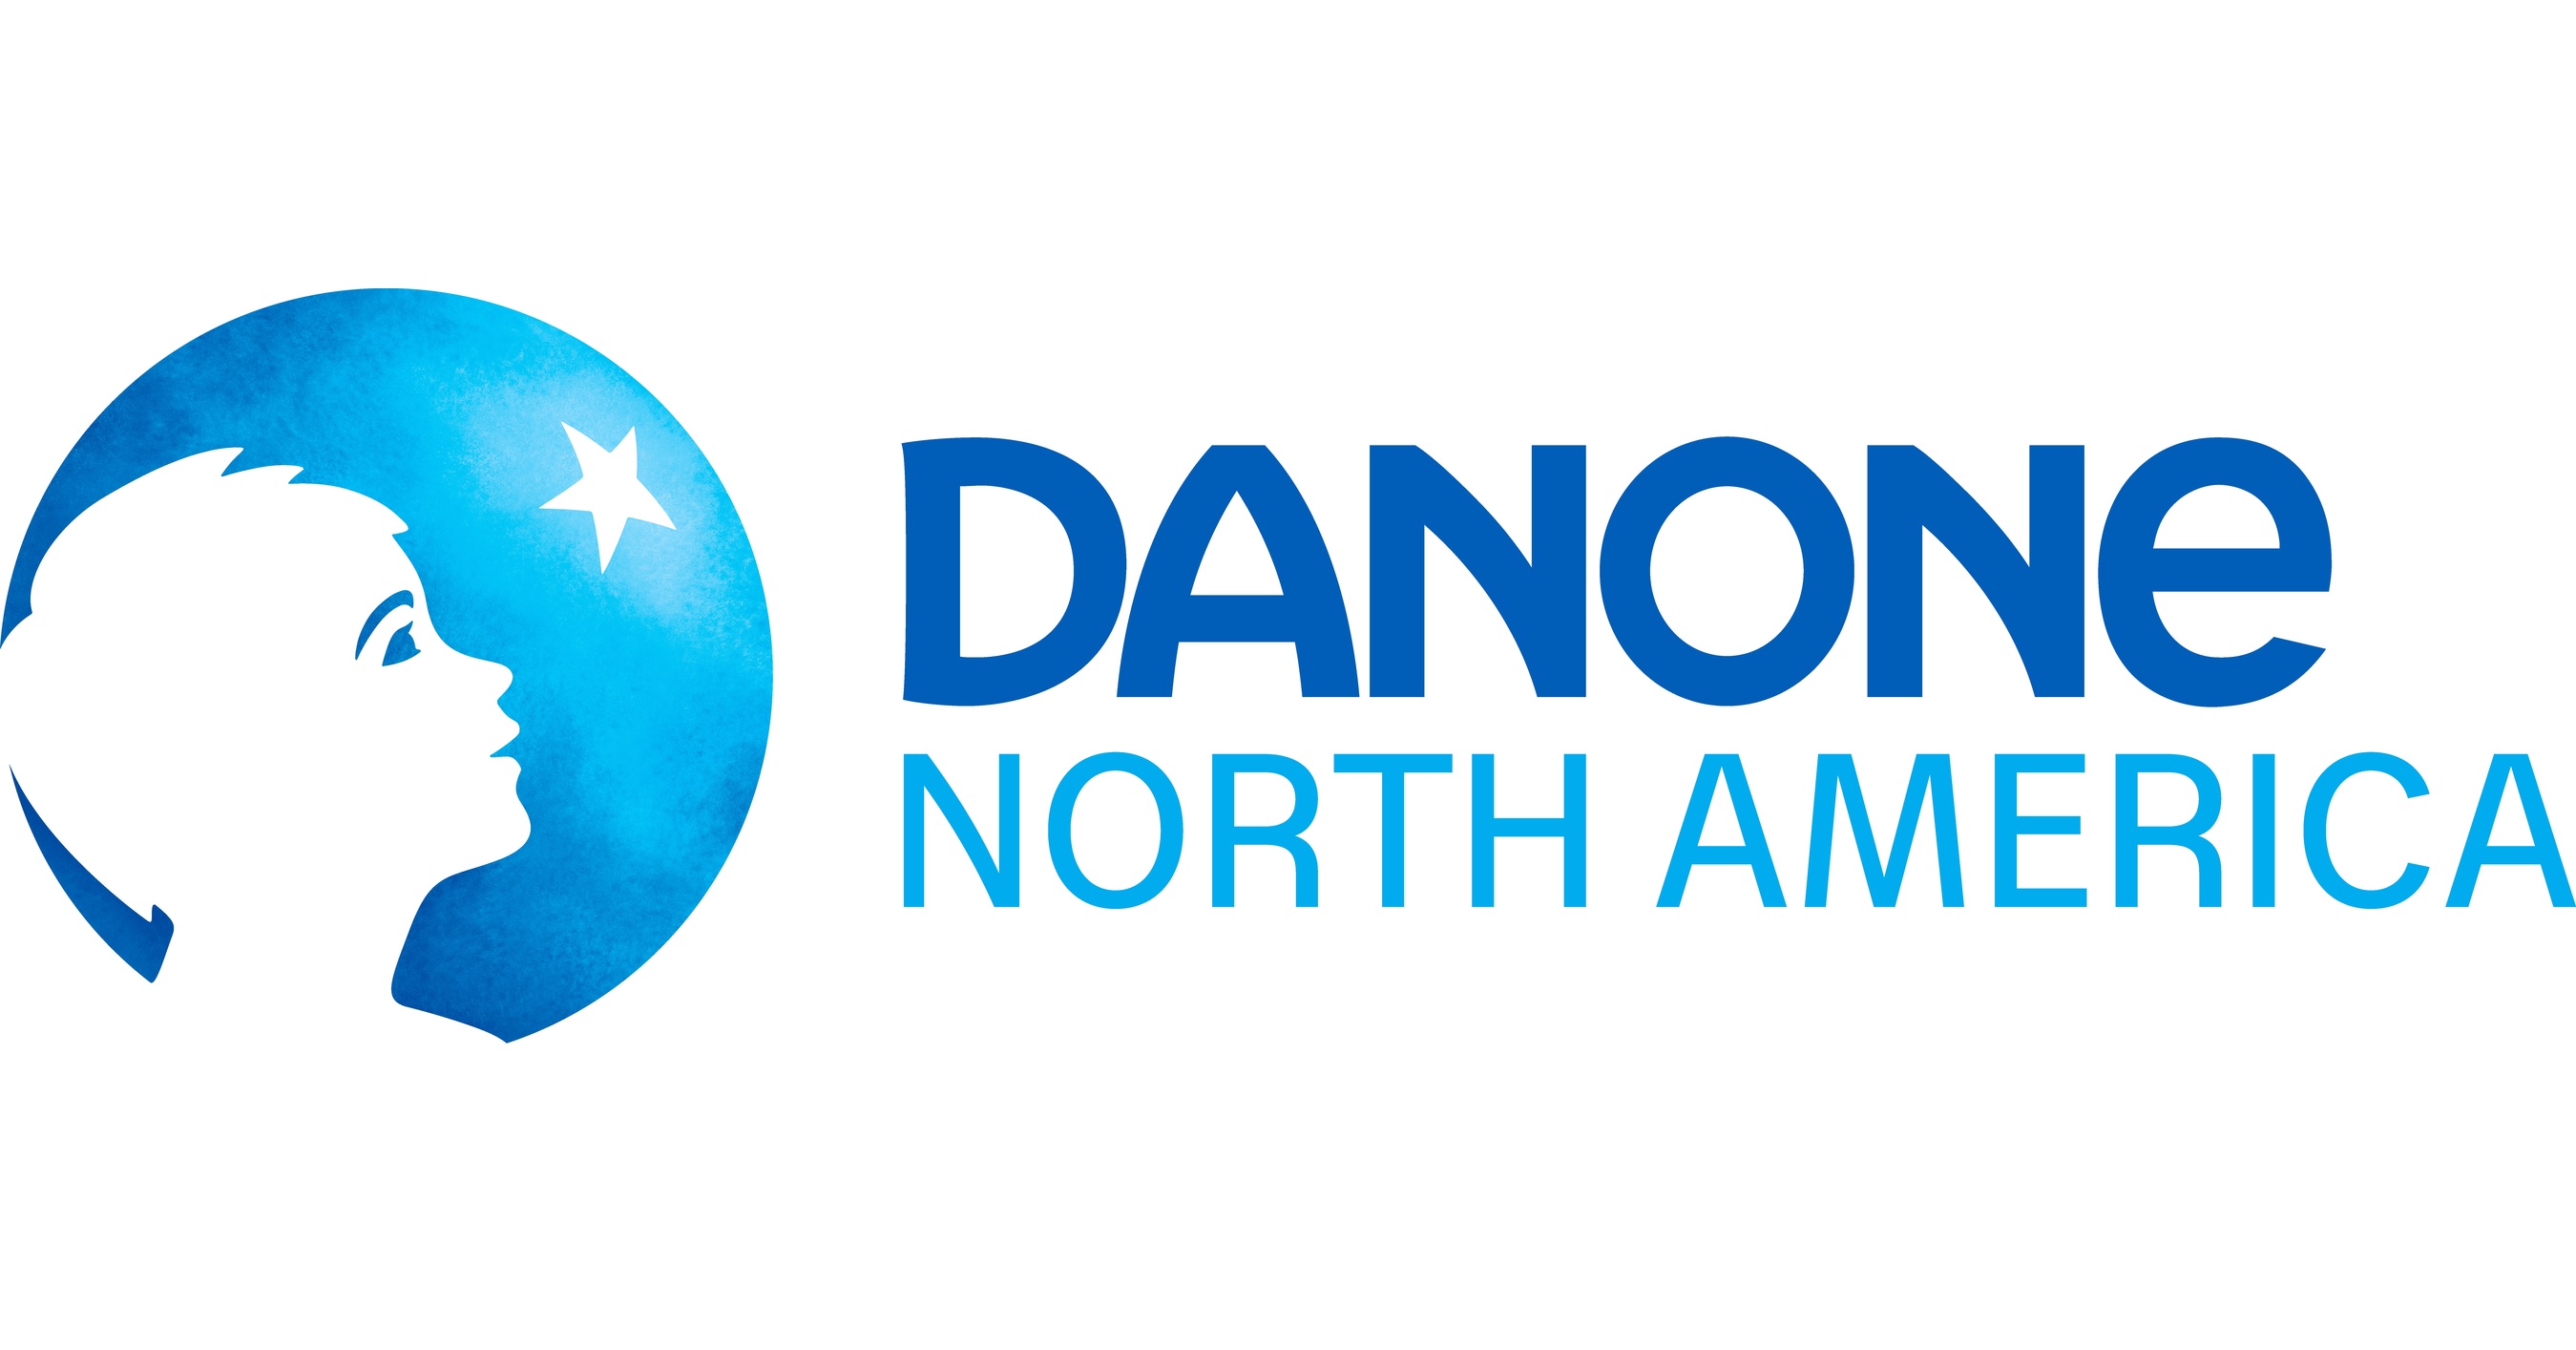 Danone North America Announces $65 Million Investment to Support Long-Term Business Growth